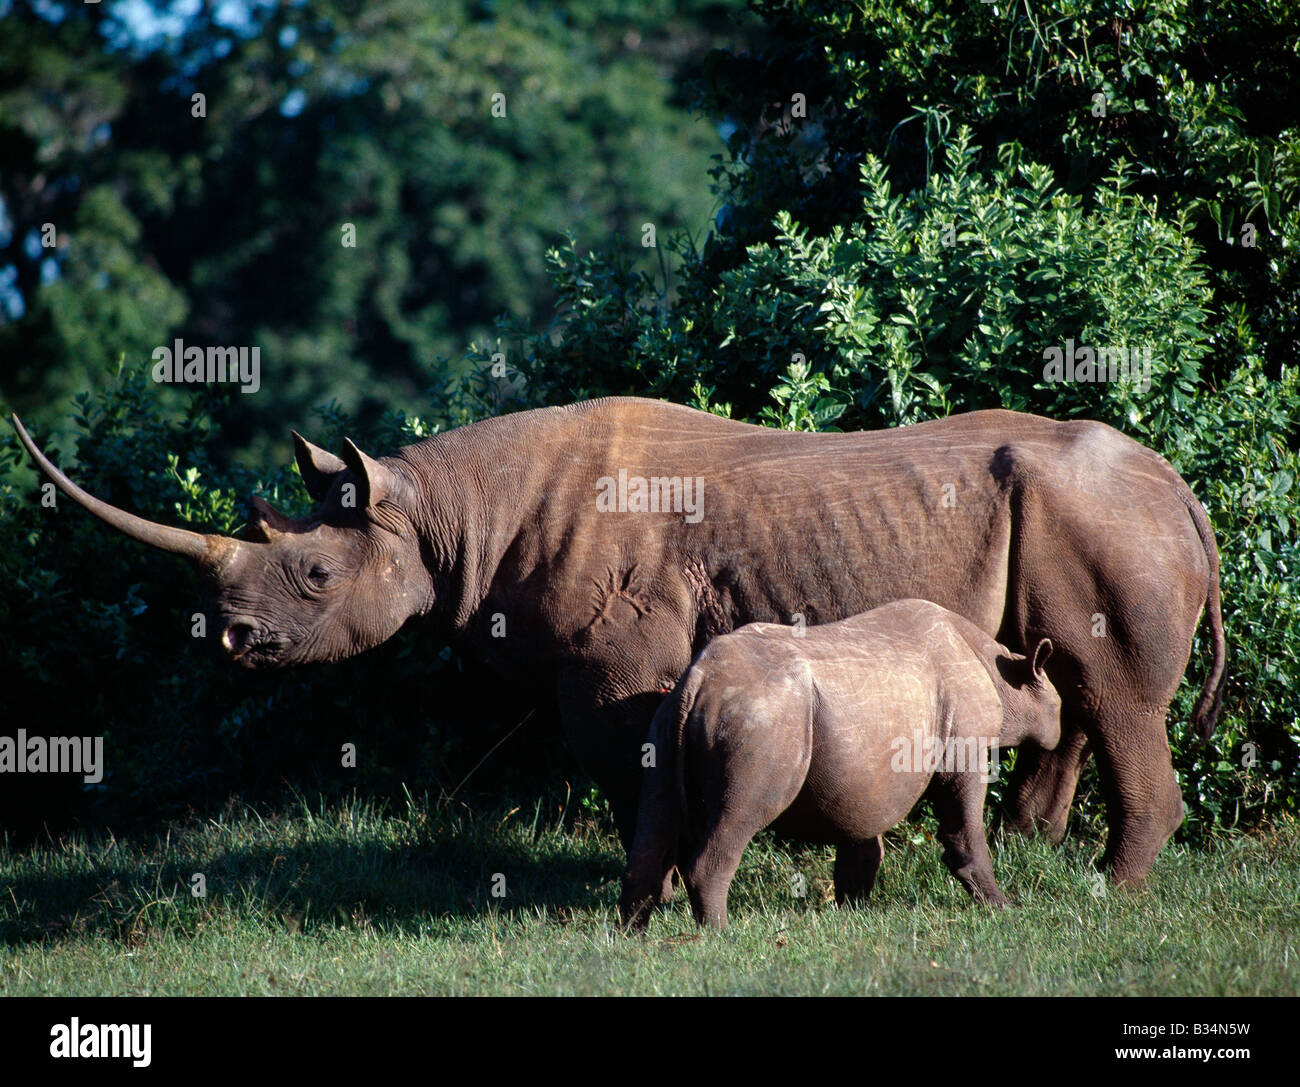 Kenya, Central Province, Aberdare National Park. A black rhino and calf in the Salient of the Aberdare National Park. Their skin colour is the result of the mud-wallows they frequent in the bright red soil of the area.Rhino offspring suckle for up to a year and only begin to take water after 4 to 5 months. Stock Photo